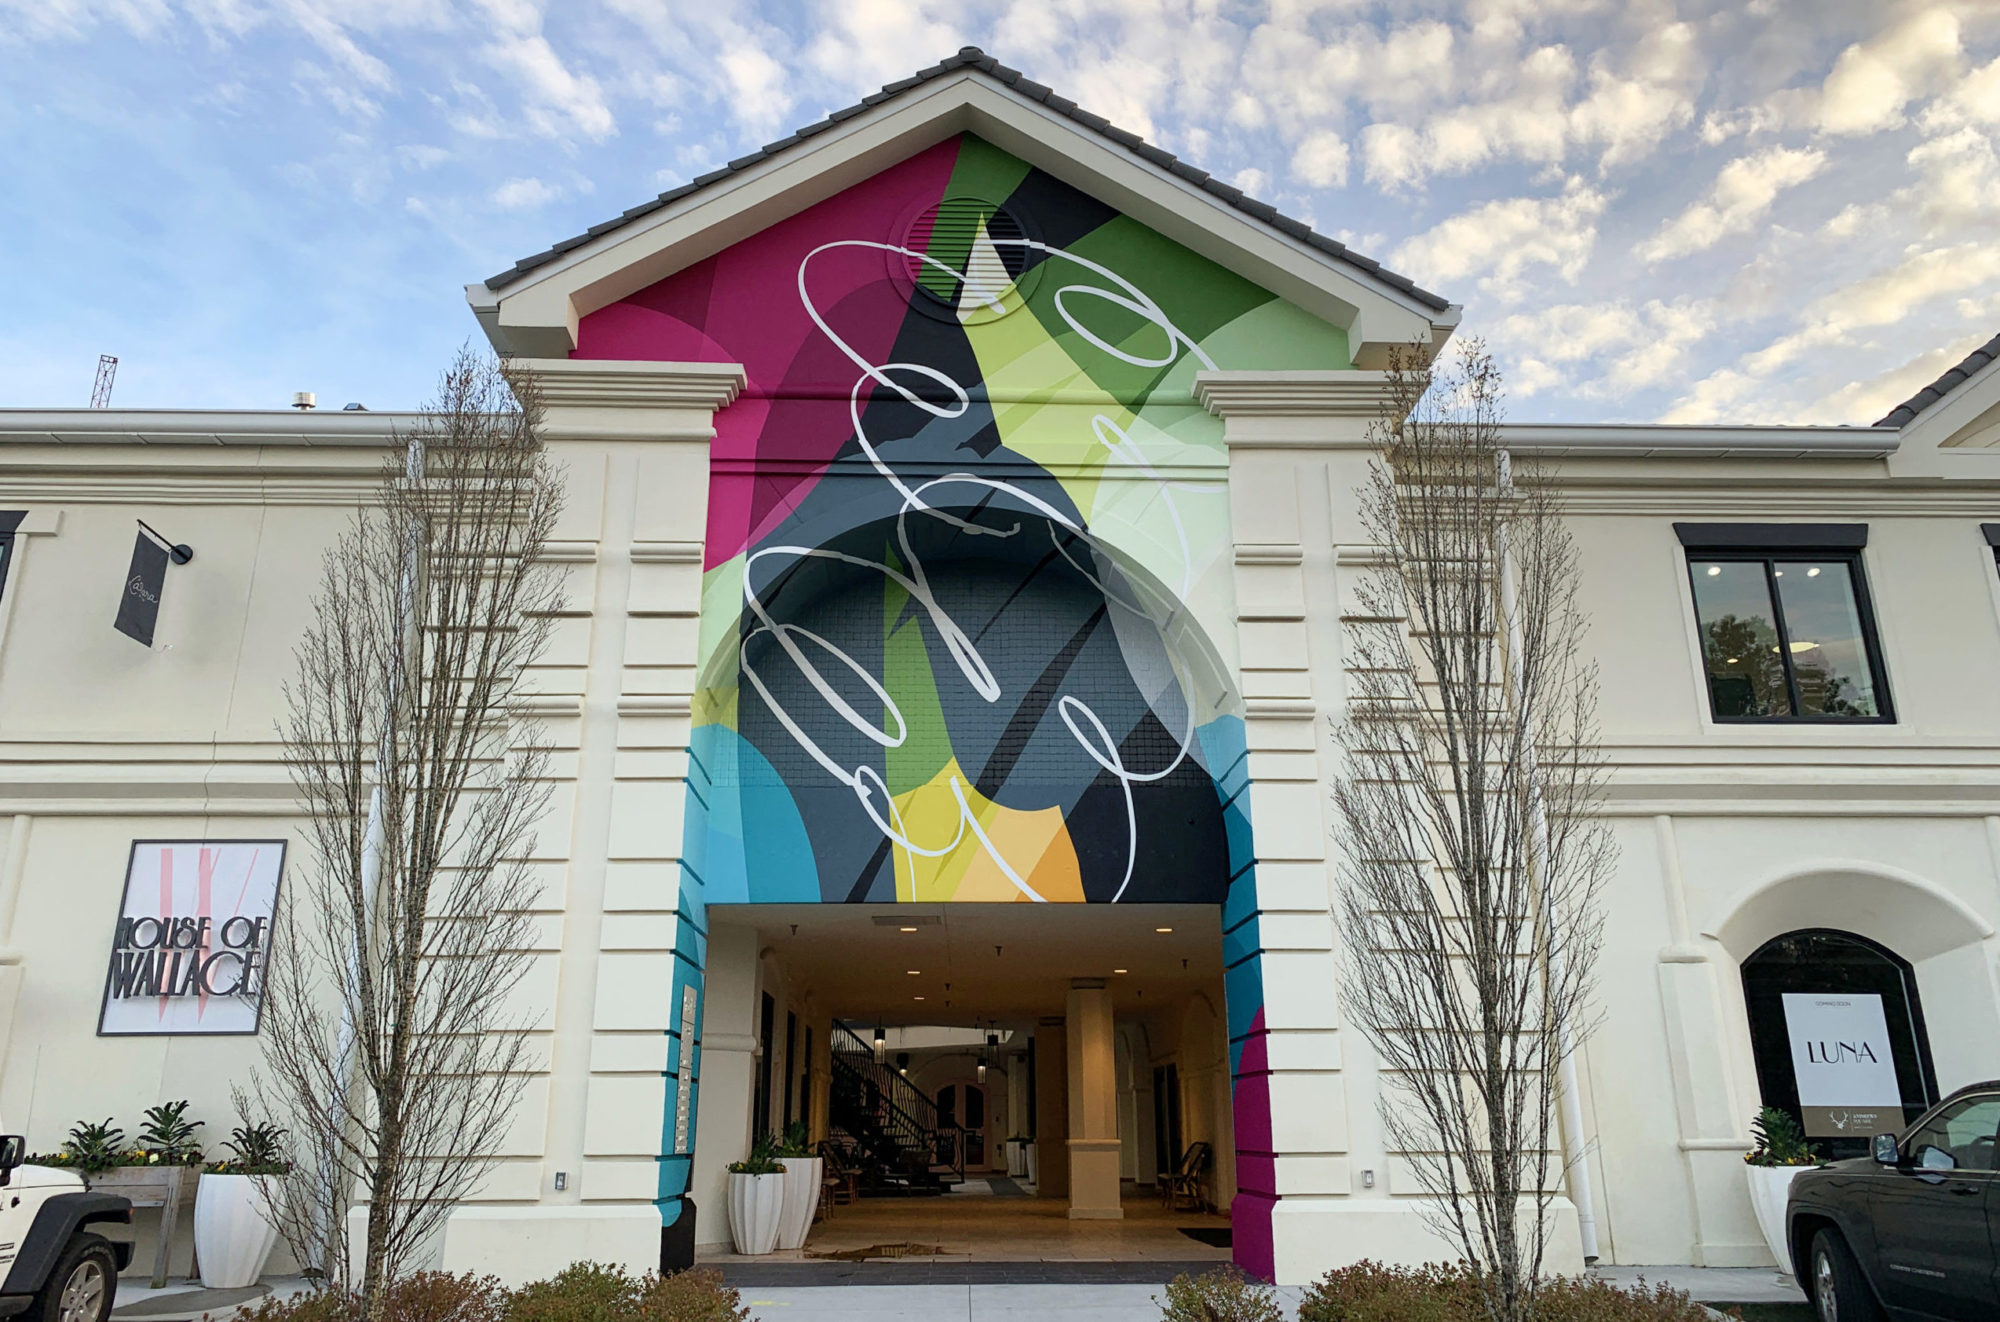 Colorful mural on building in buckhead shopping plaza by Ryan Coleman